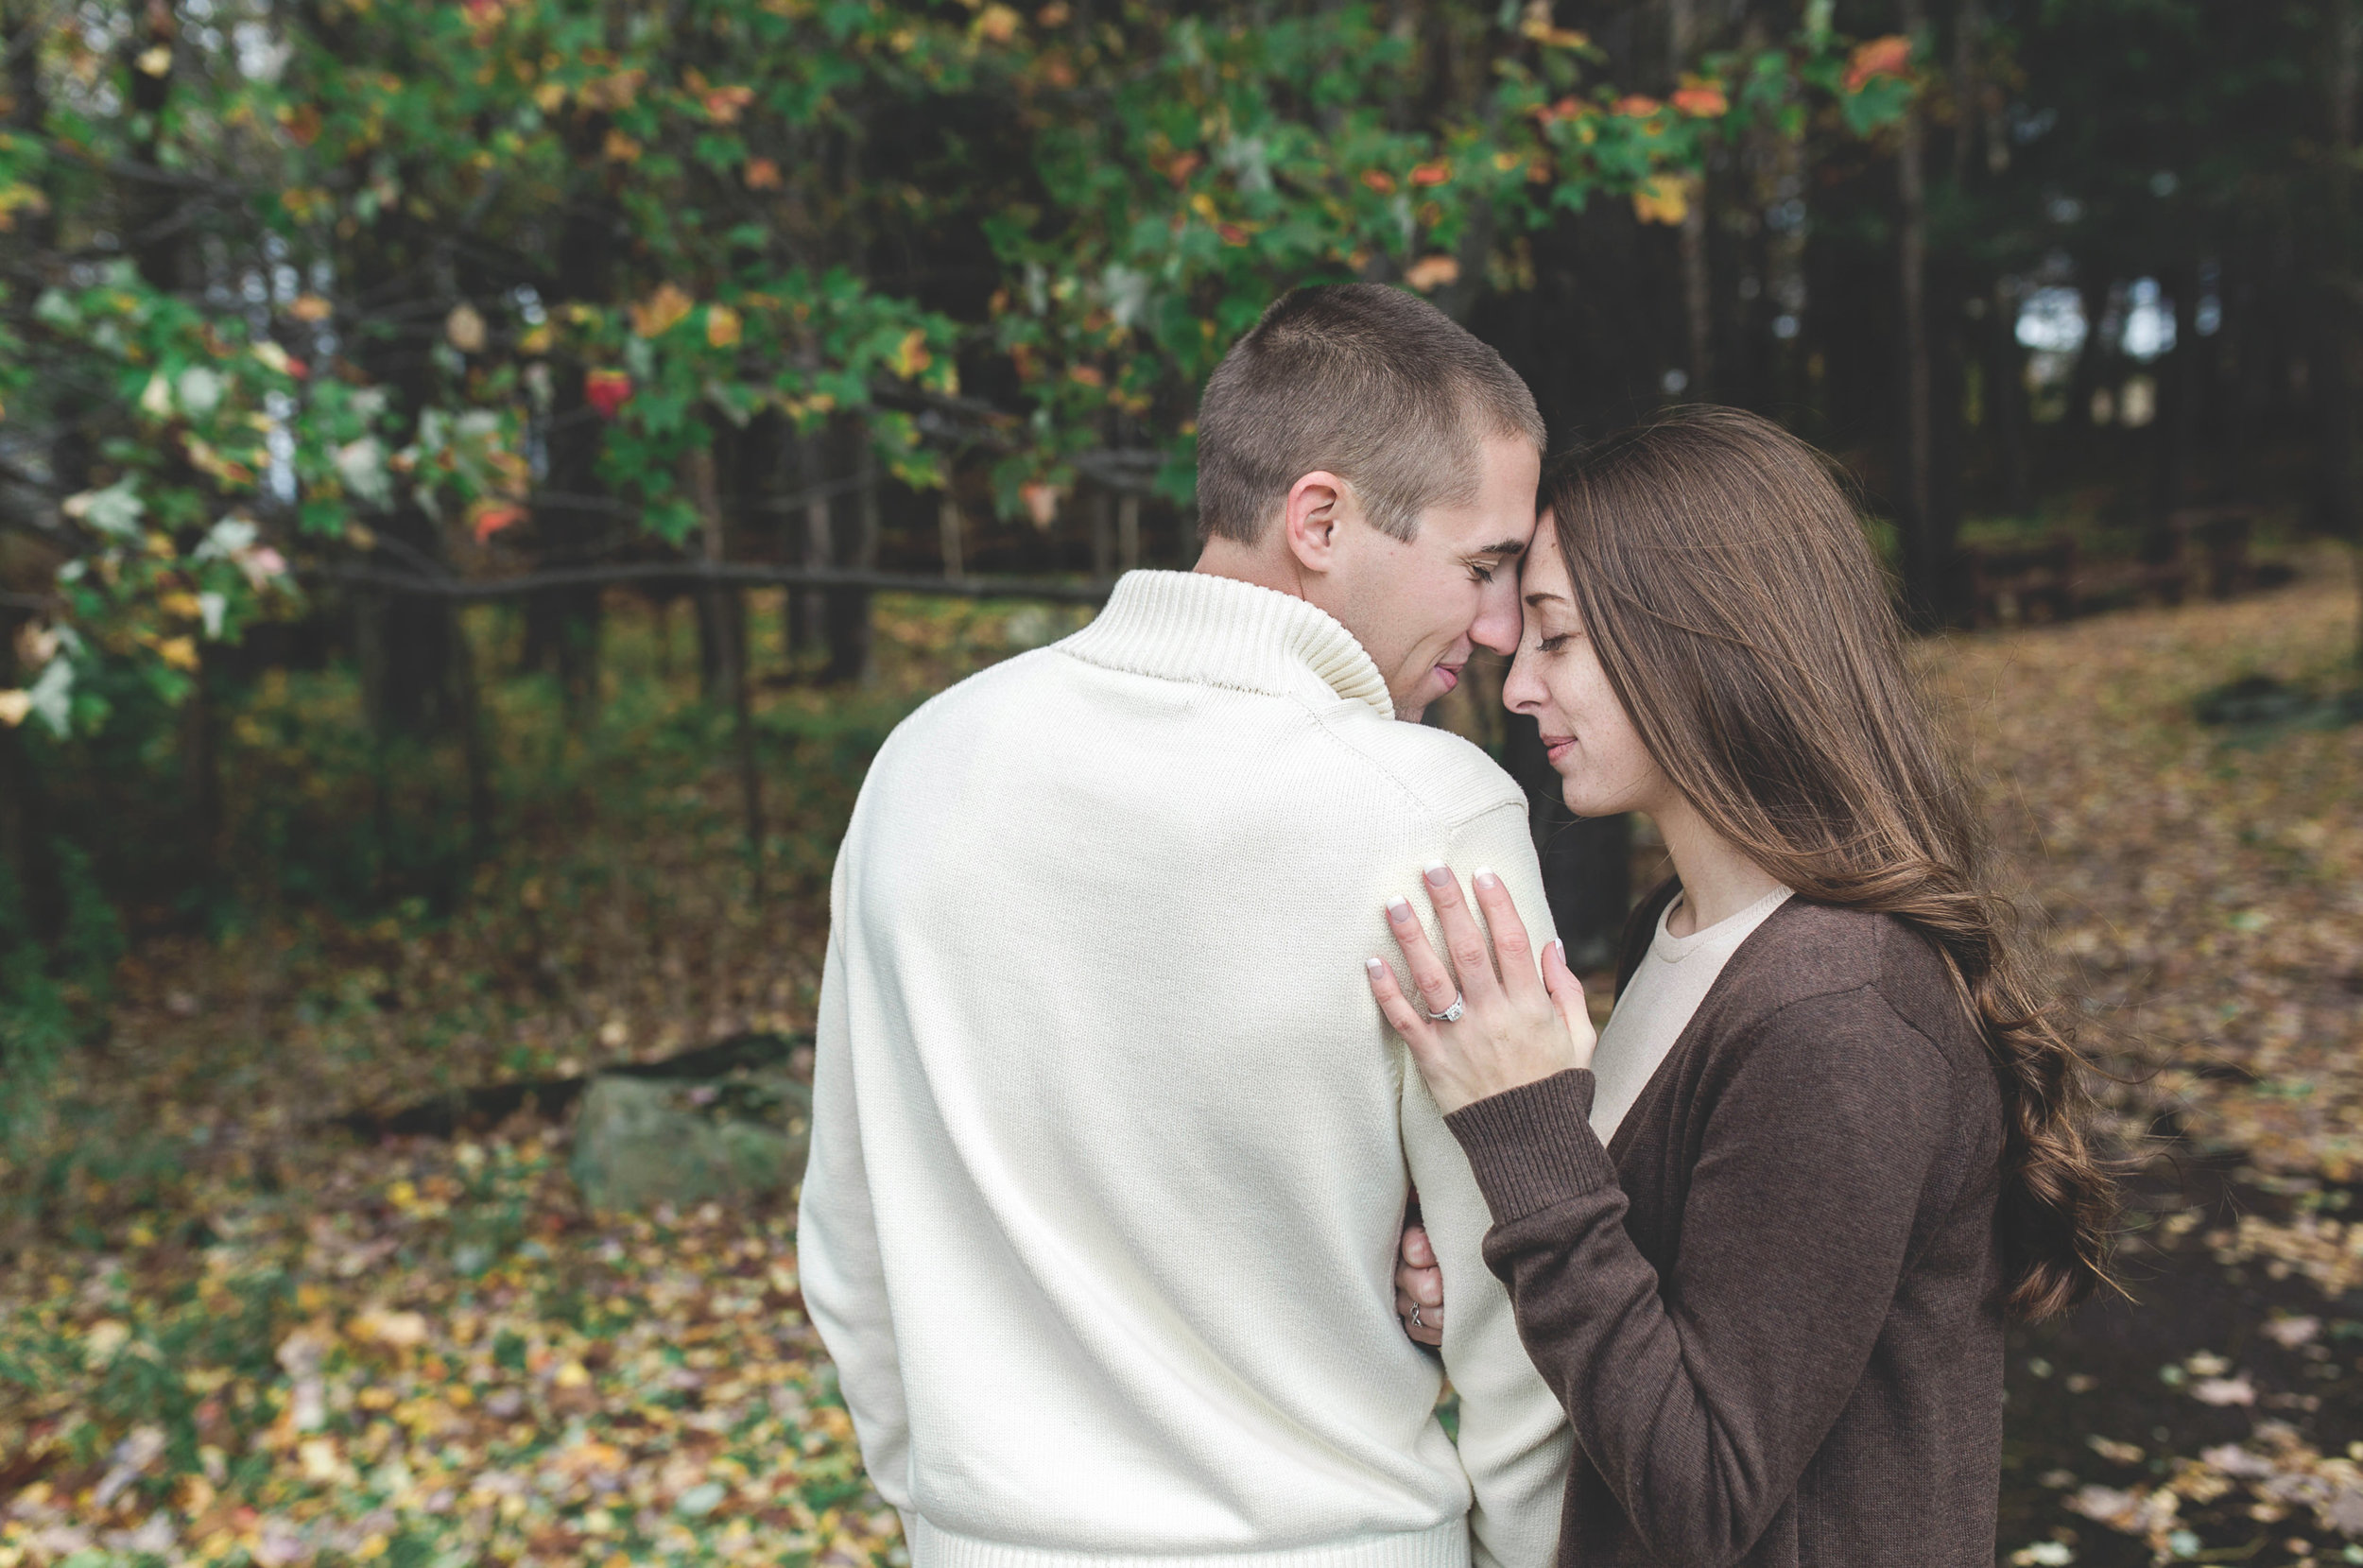 Altoona PA central pa state college Monroville wedding photographer engagement lemon house cresson pa_mariadylan (6).jpg